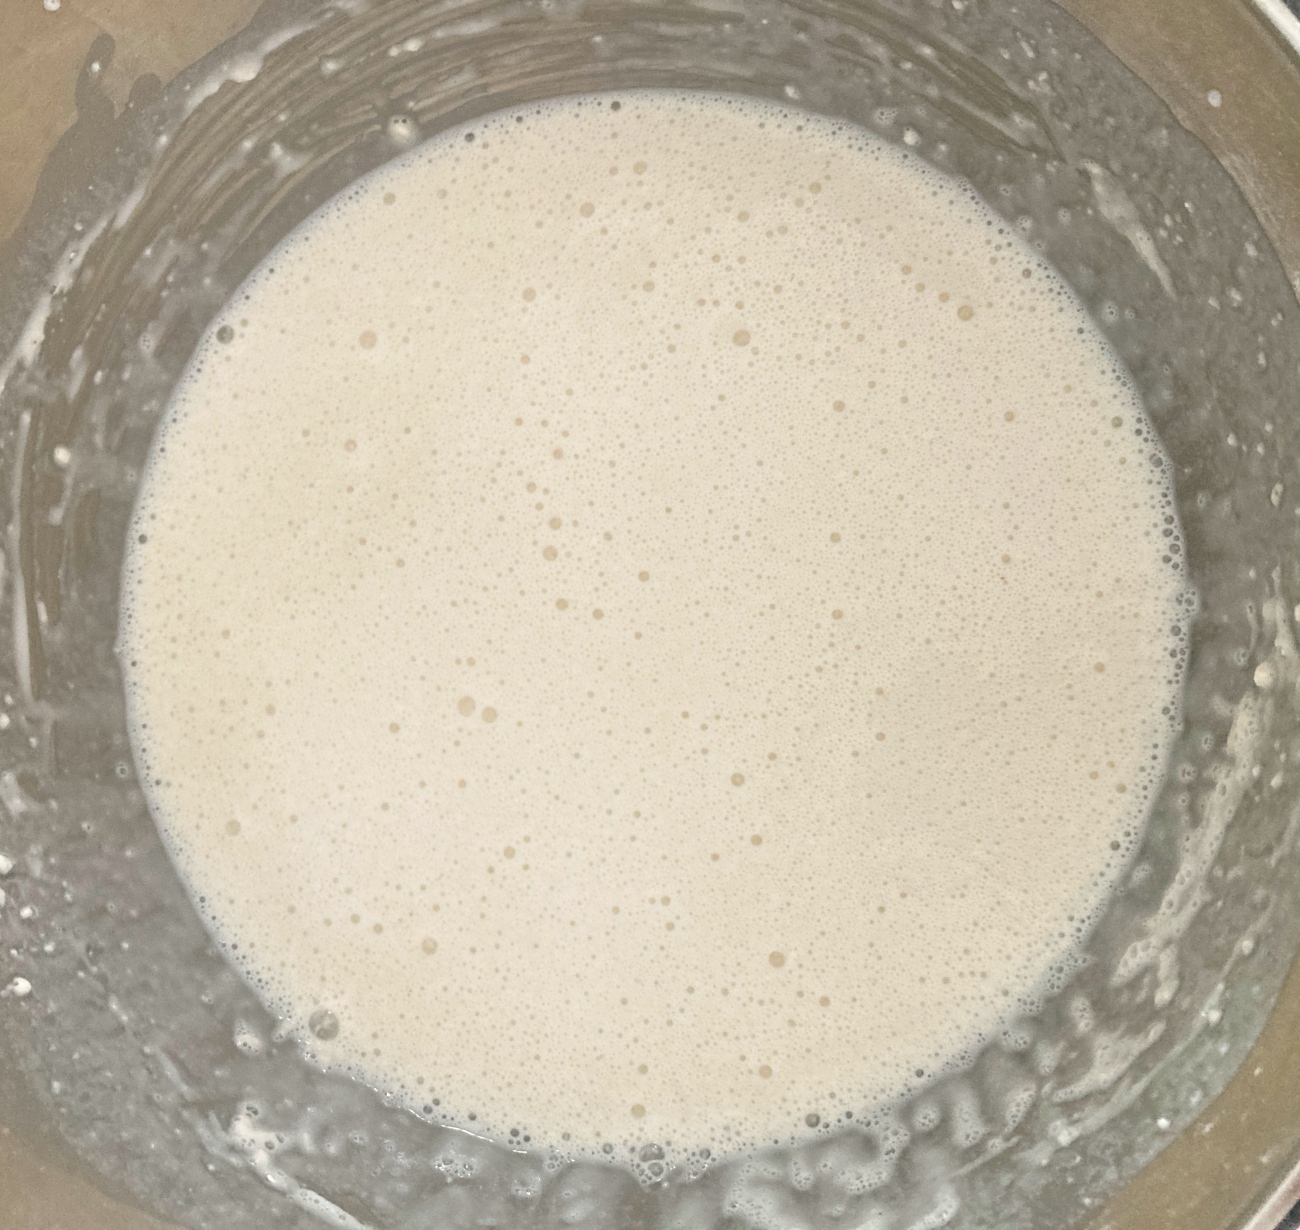 When ready to fry heat oil over medium-high heat (to 350˚F). Combine flour, sugar, baking powder, and salt in large bowl. Add milk and stir until batter forms.